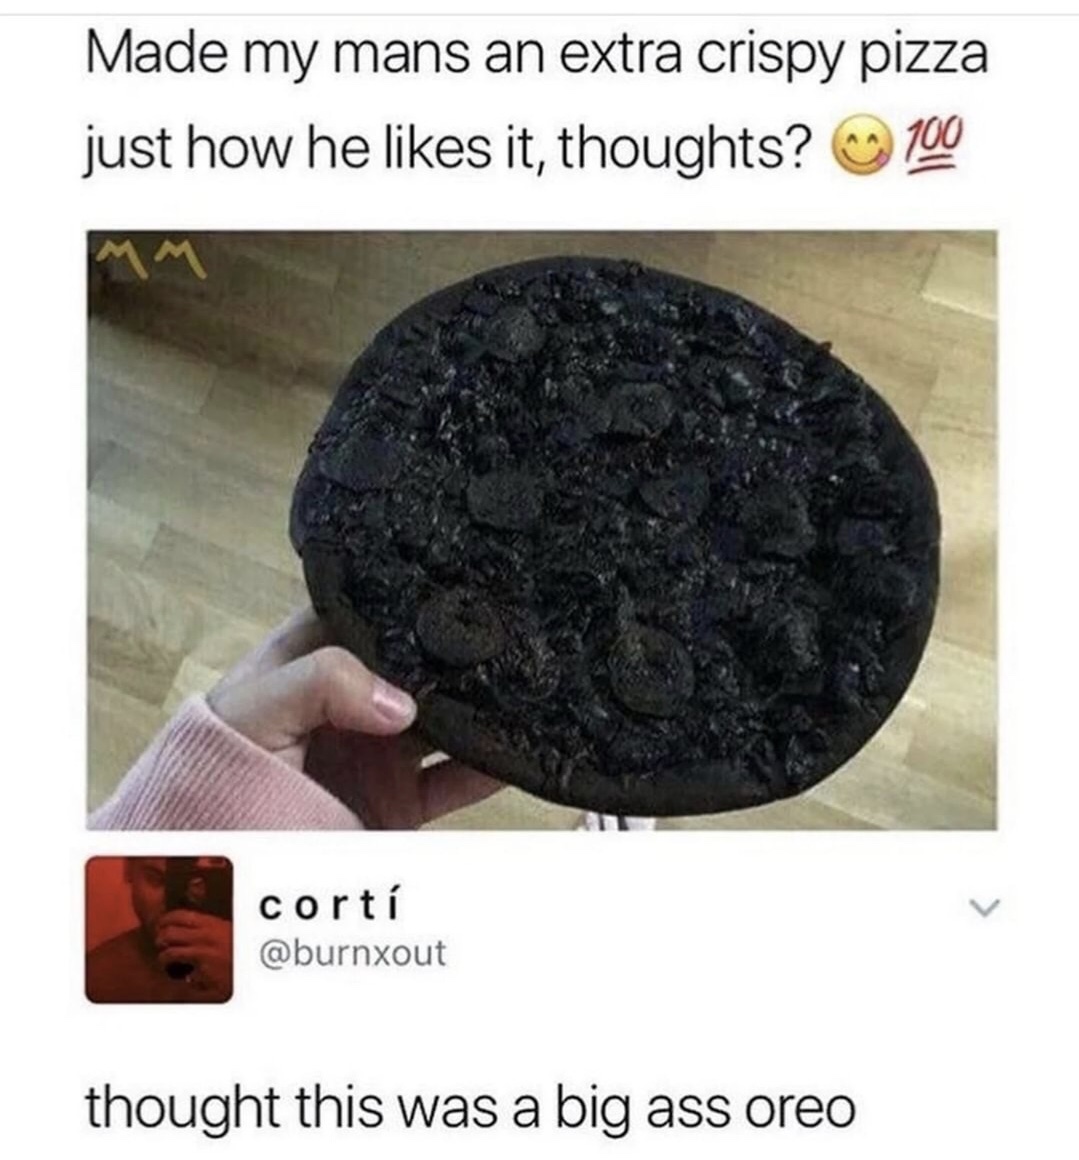 my mans - Made my mans an extra crispy pizza just how he it, thoughts? 100 corti thought this was a big ass oreo